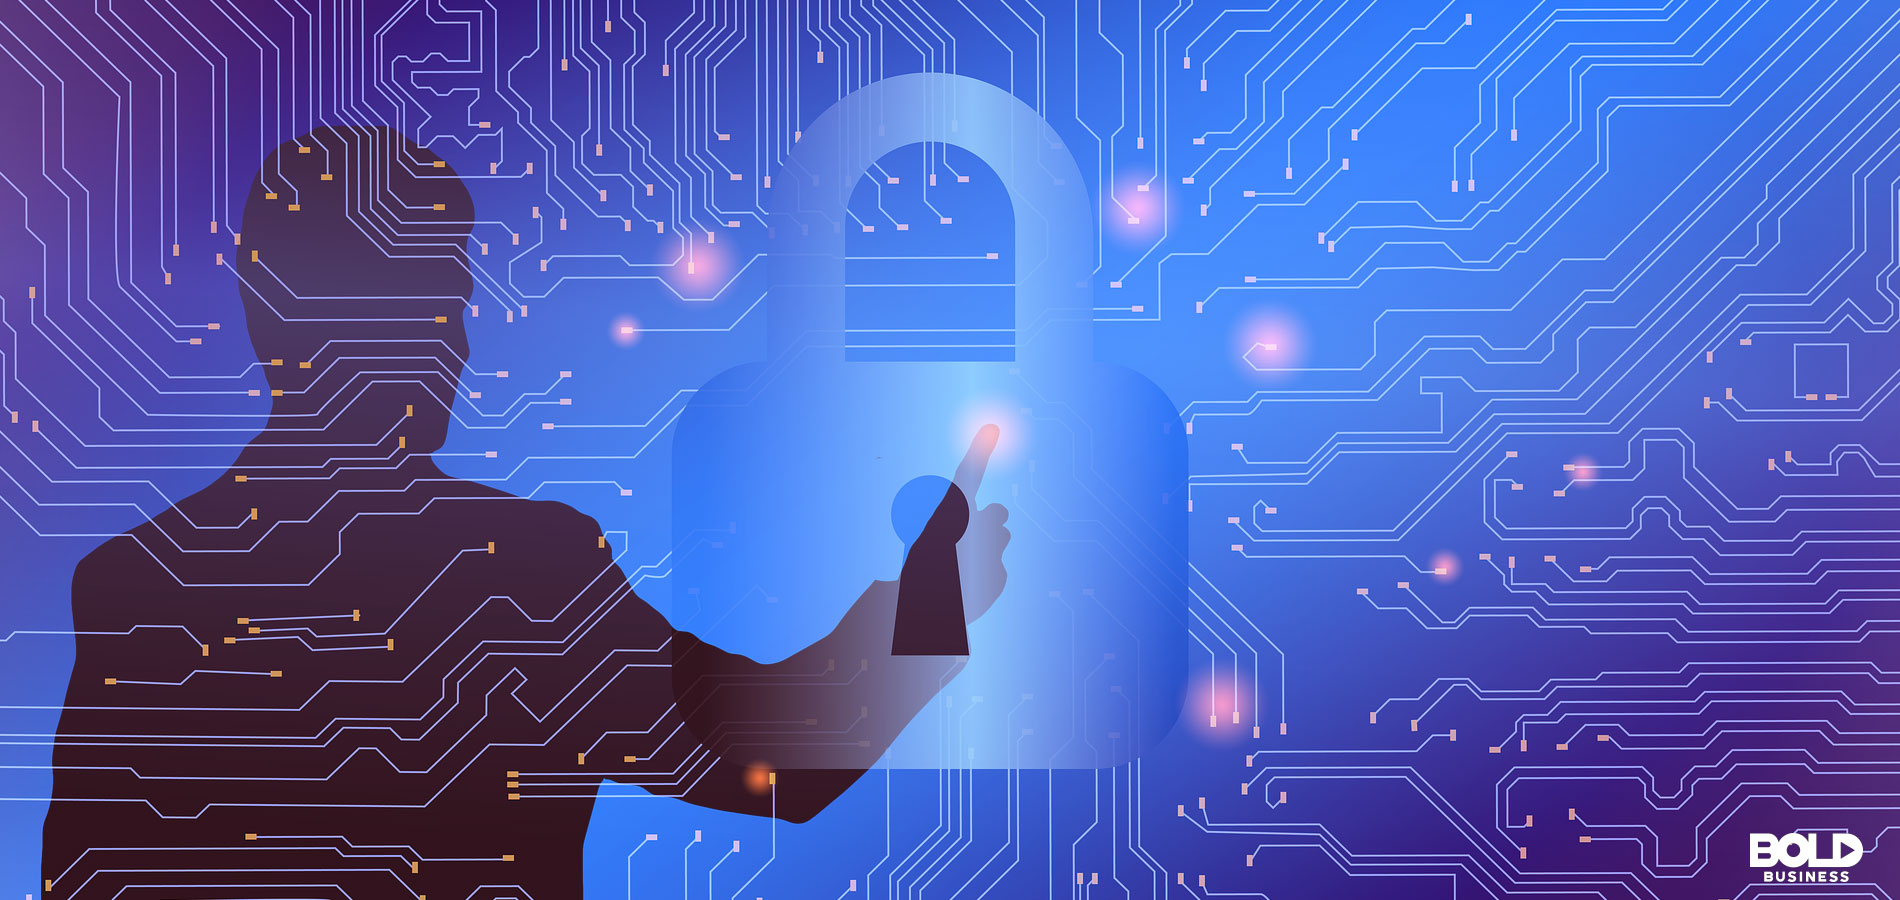 silhouette of a man touching a lock on a screen, an illustration of honeywell cybersecurity sytem